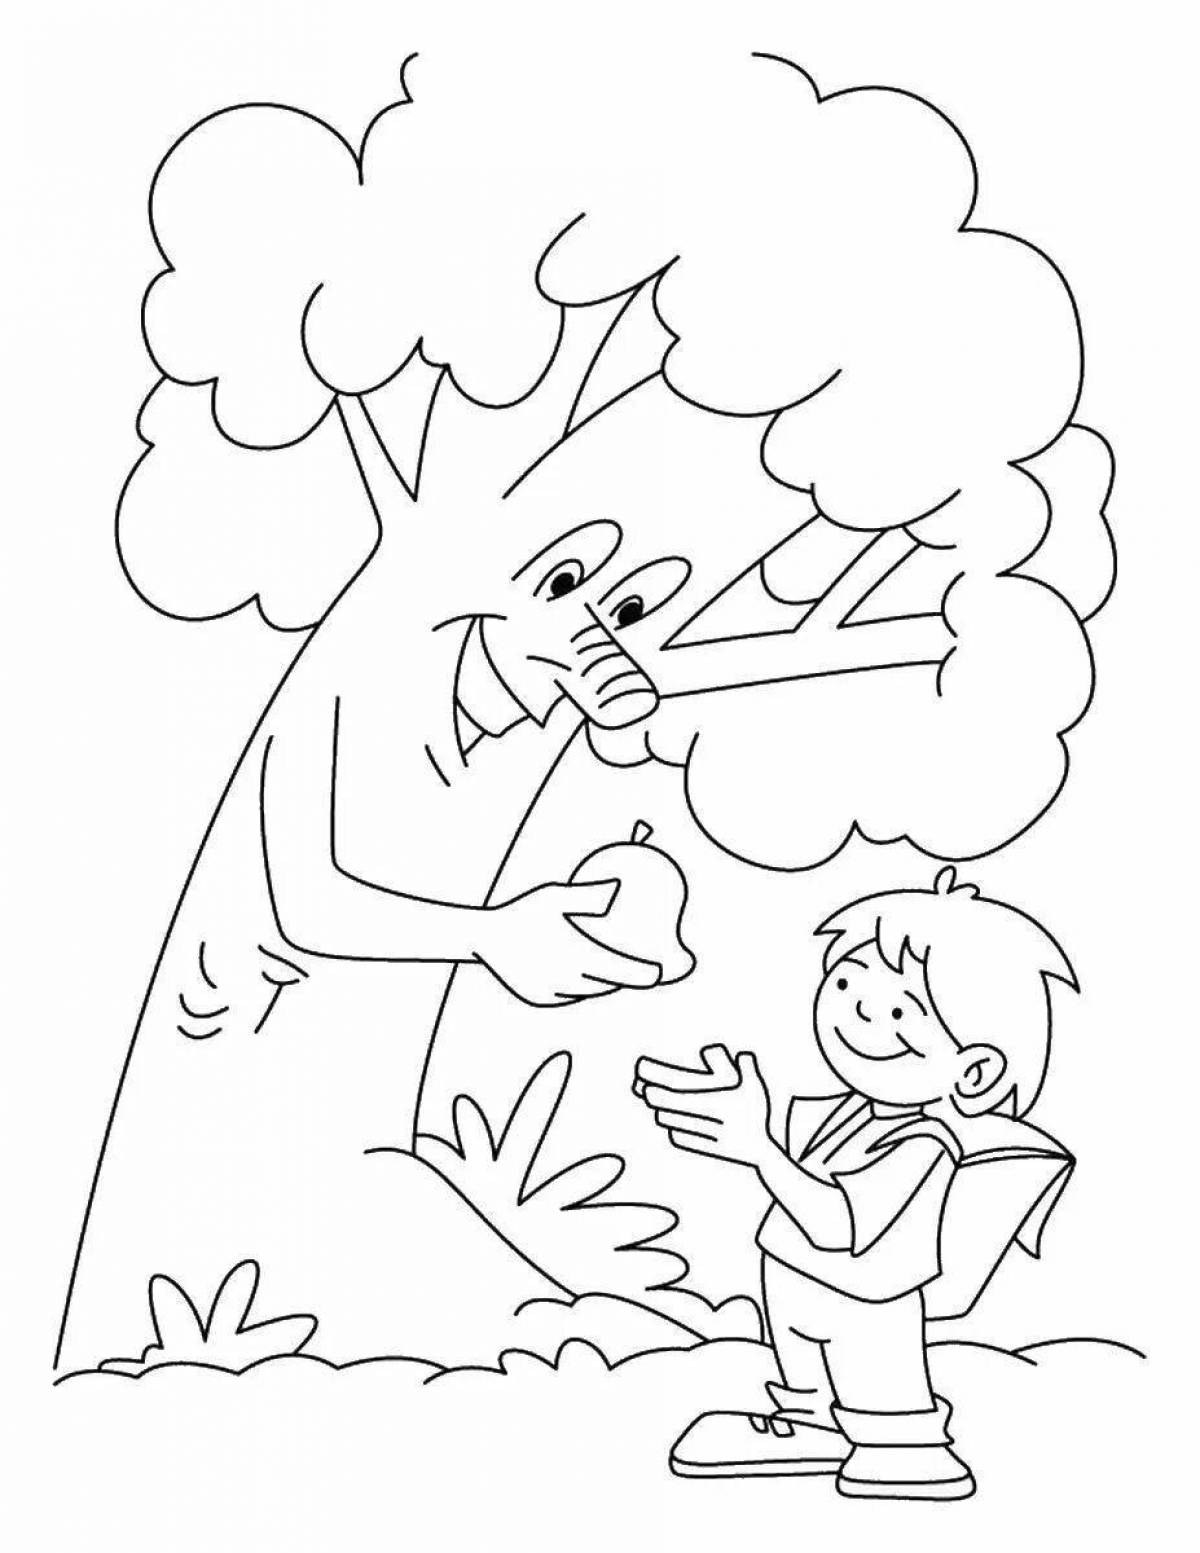 Inviting coloring pages for children rules of conduct in the forest